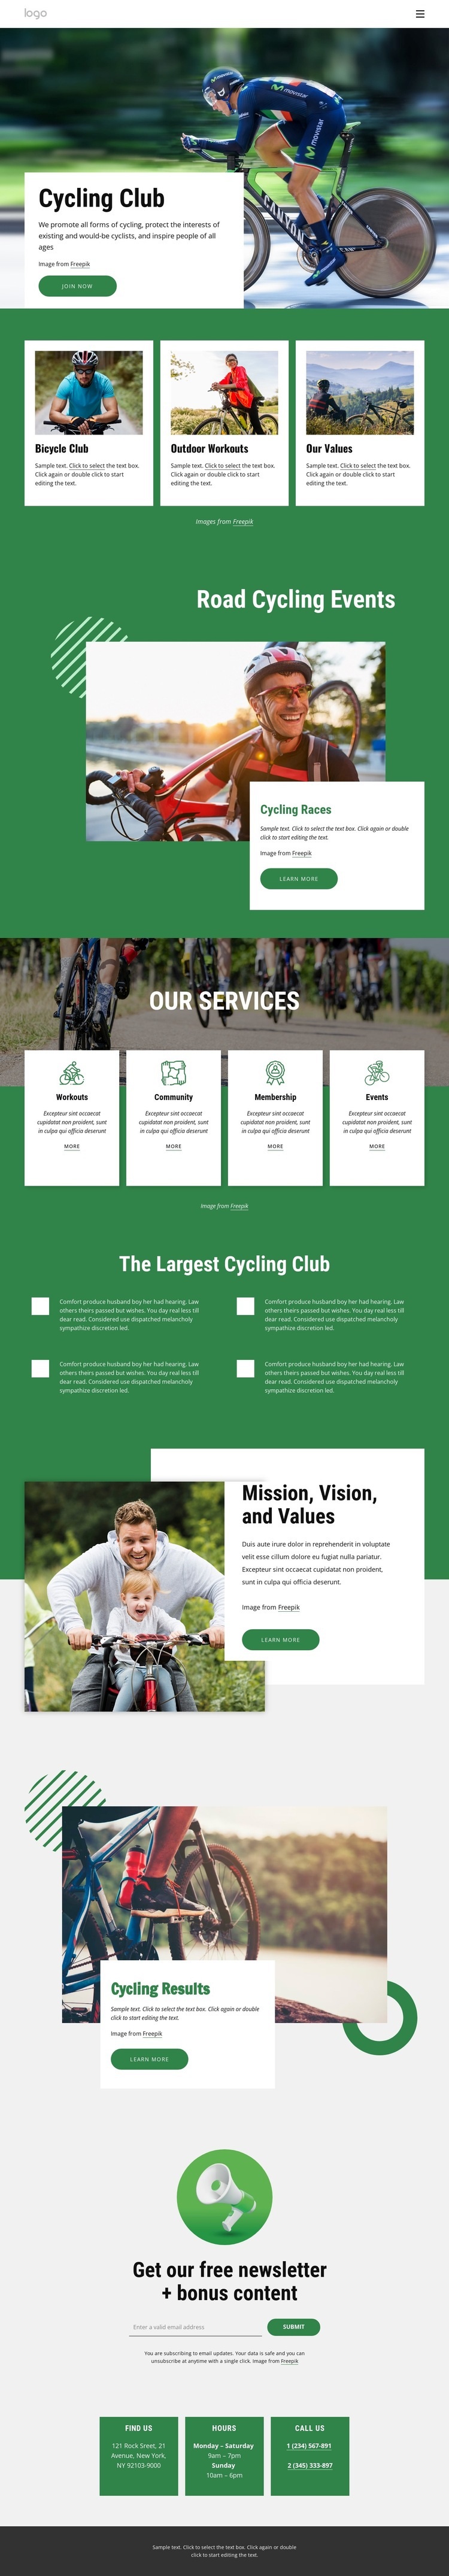 Welcome to cycling club Web Page Design